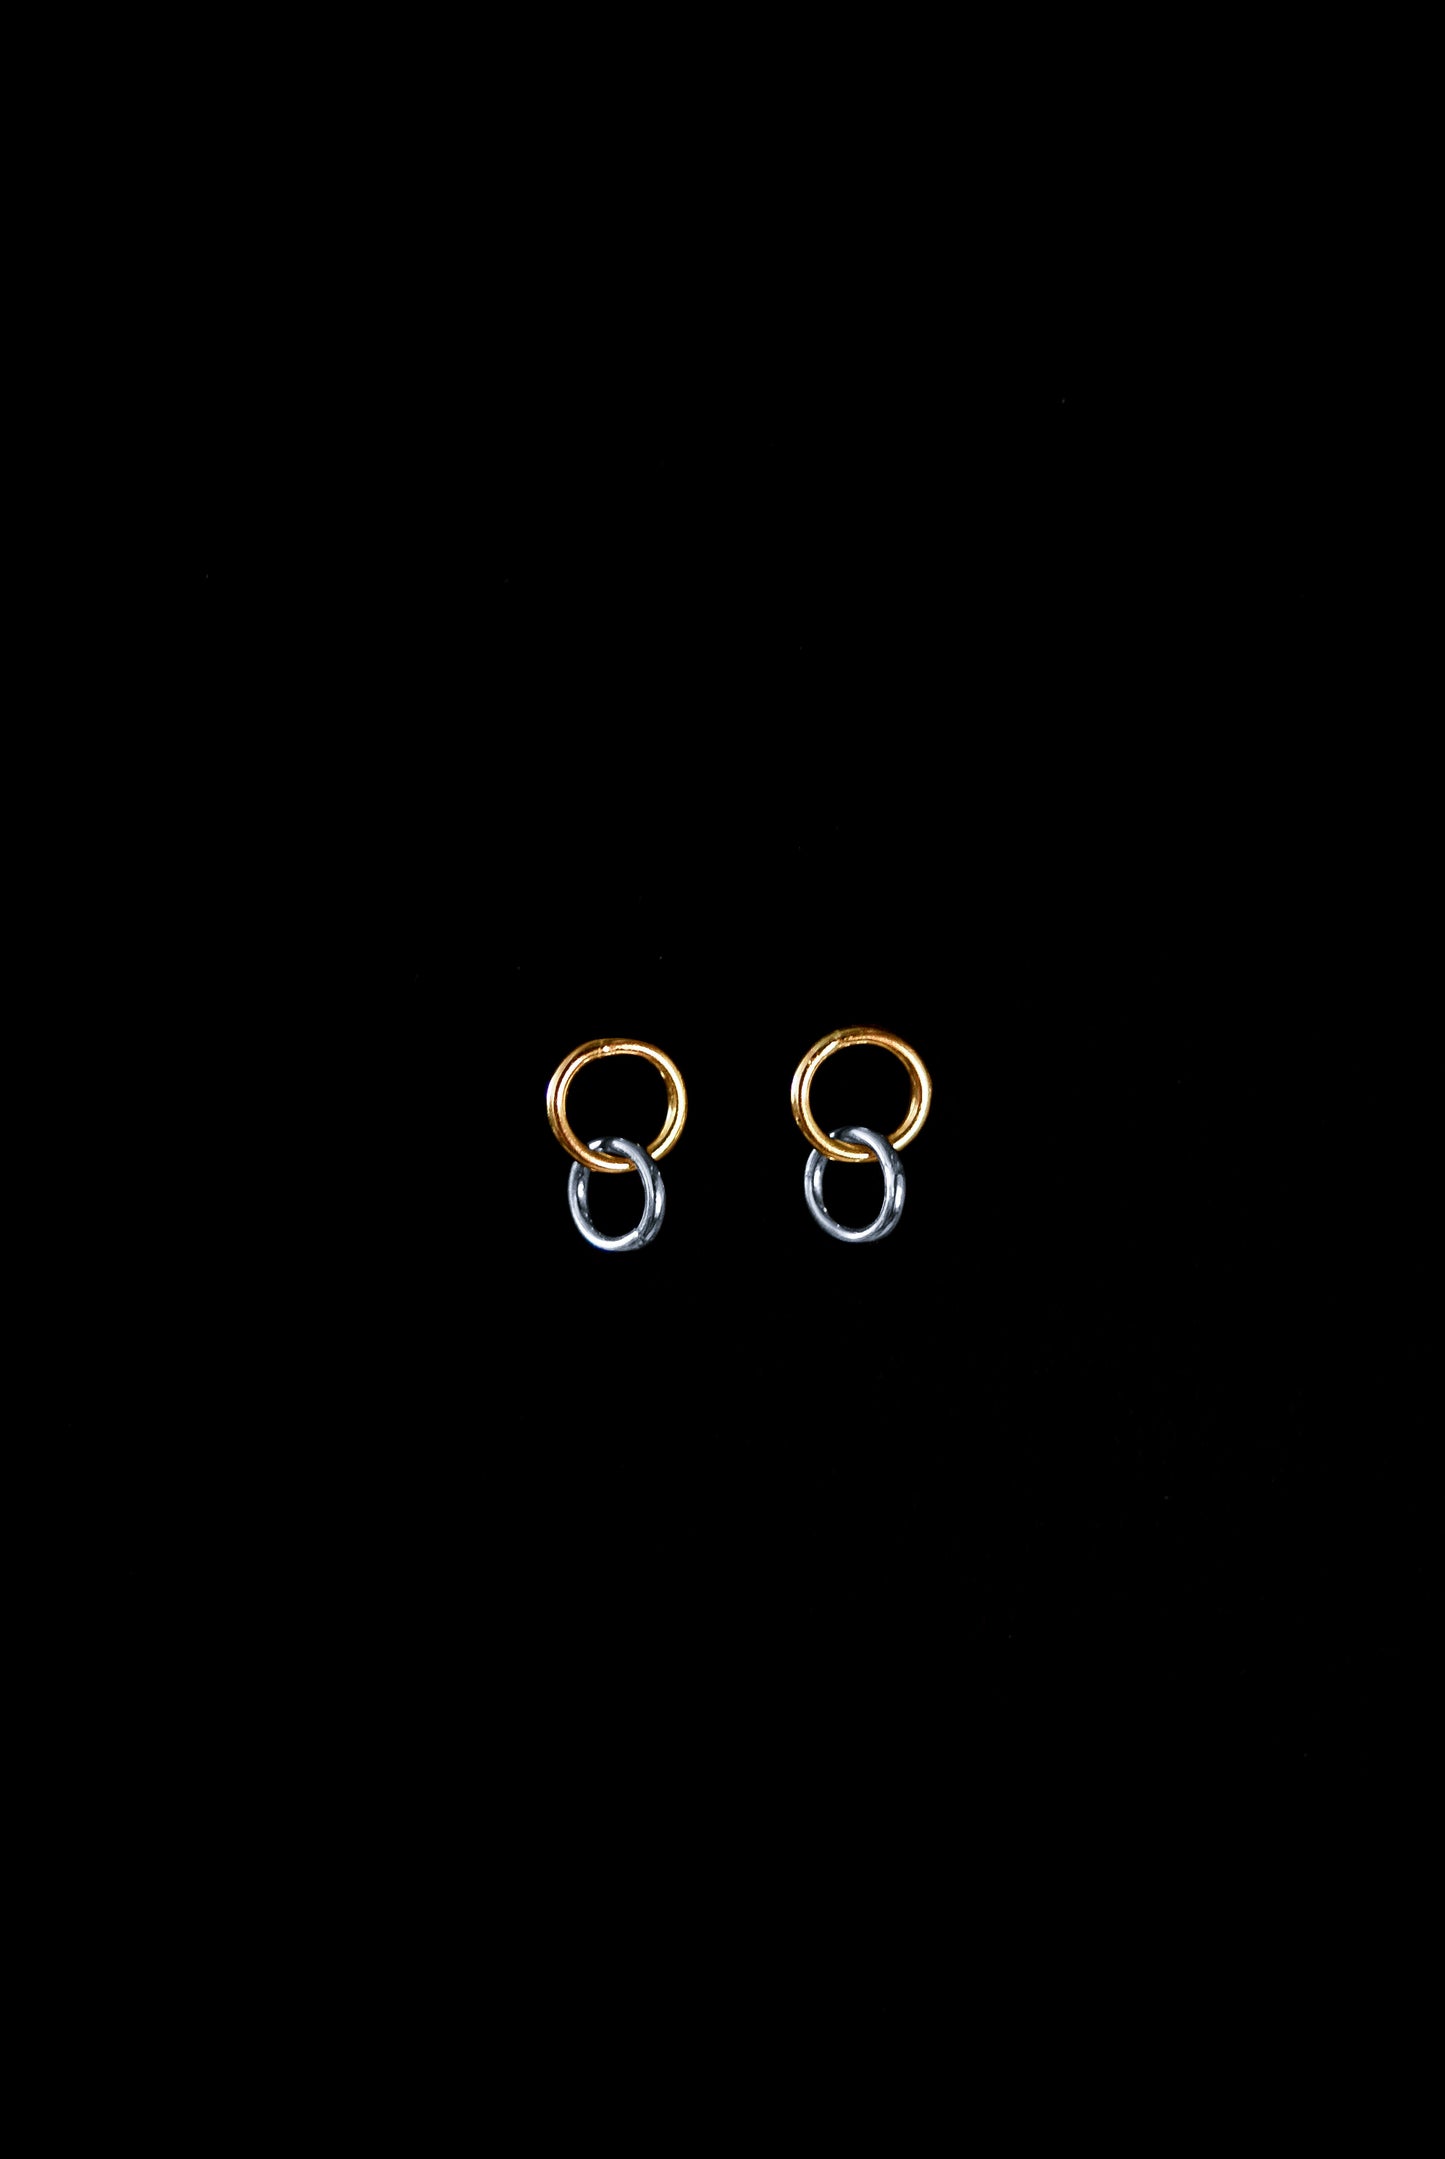 Link Stud Earrings, Gold Fill, Rose Gold Fill, or Sterling Silver